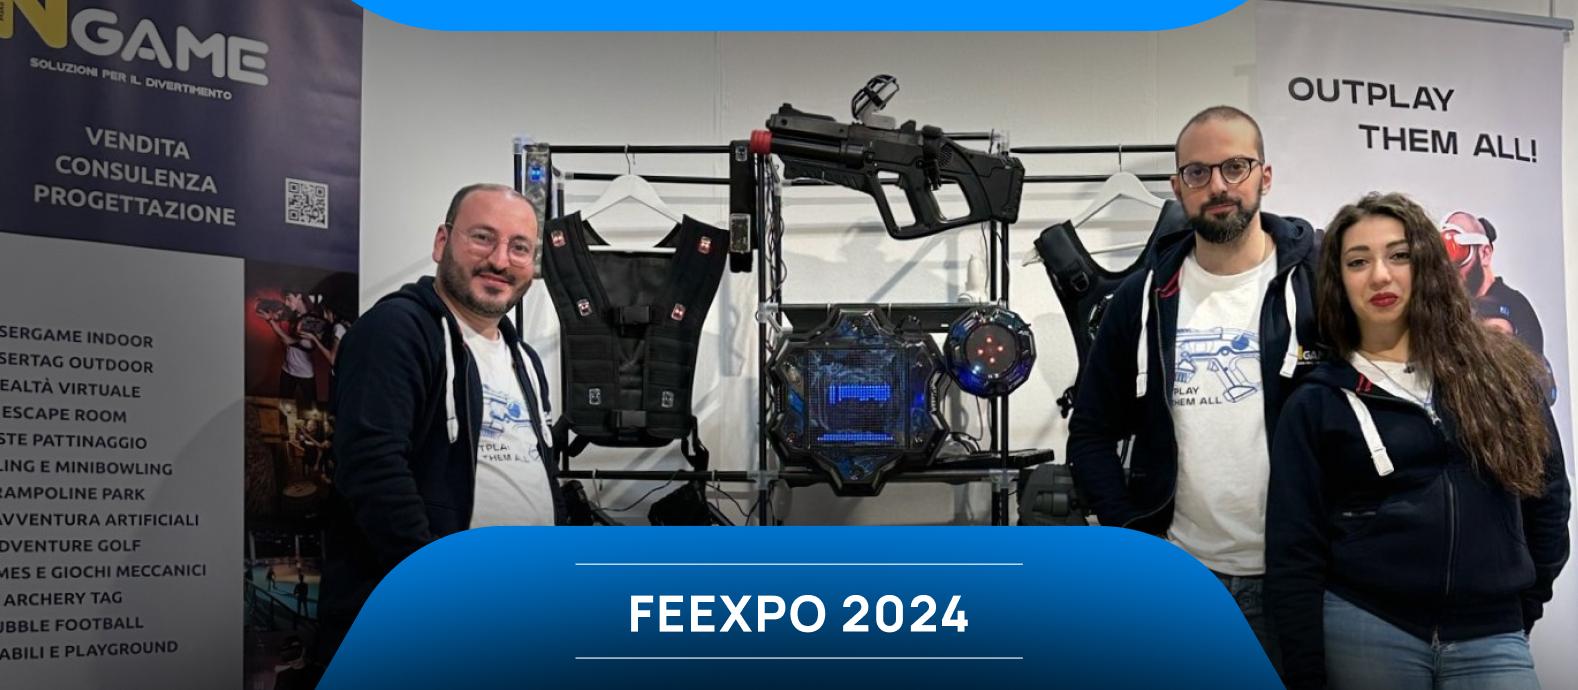 NETRONIC products were presented at FEEXPO in Bergamo, Italy